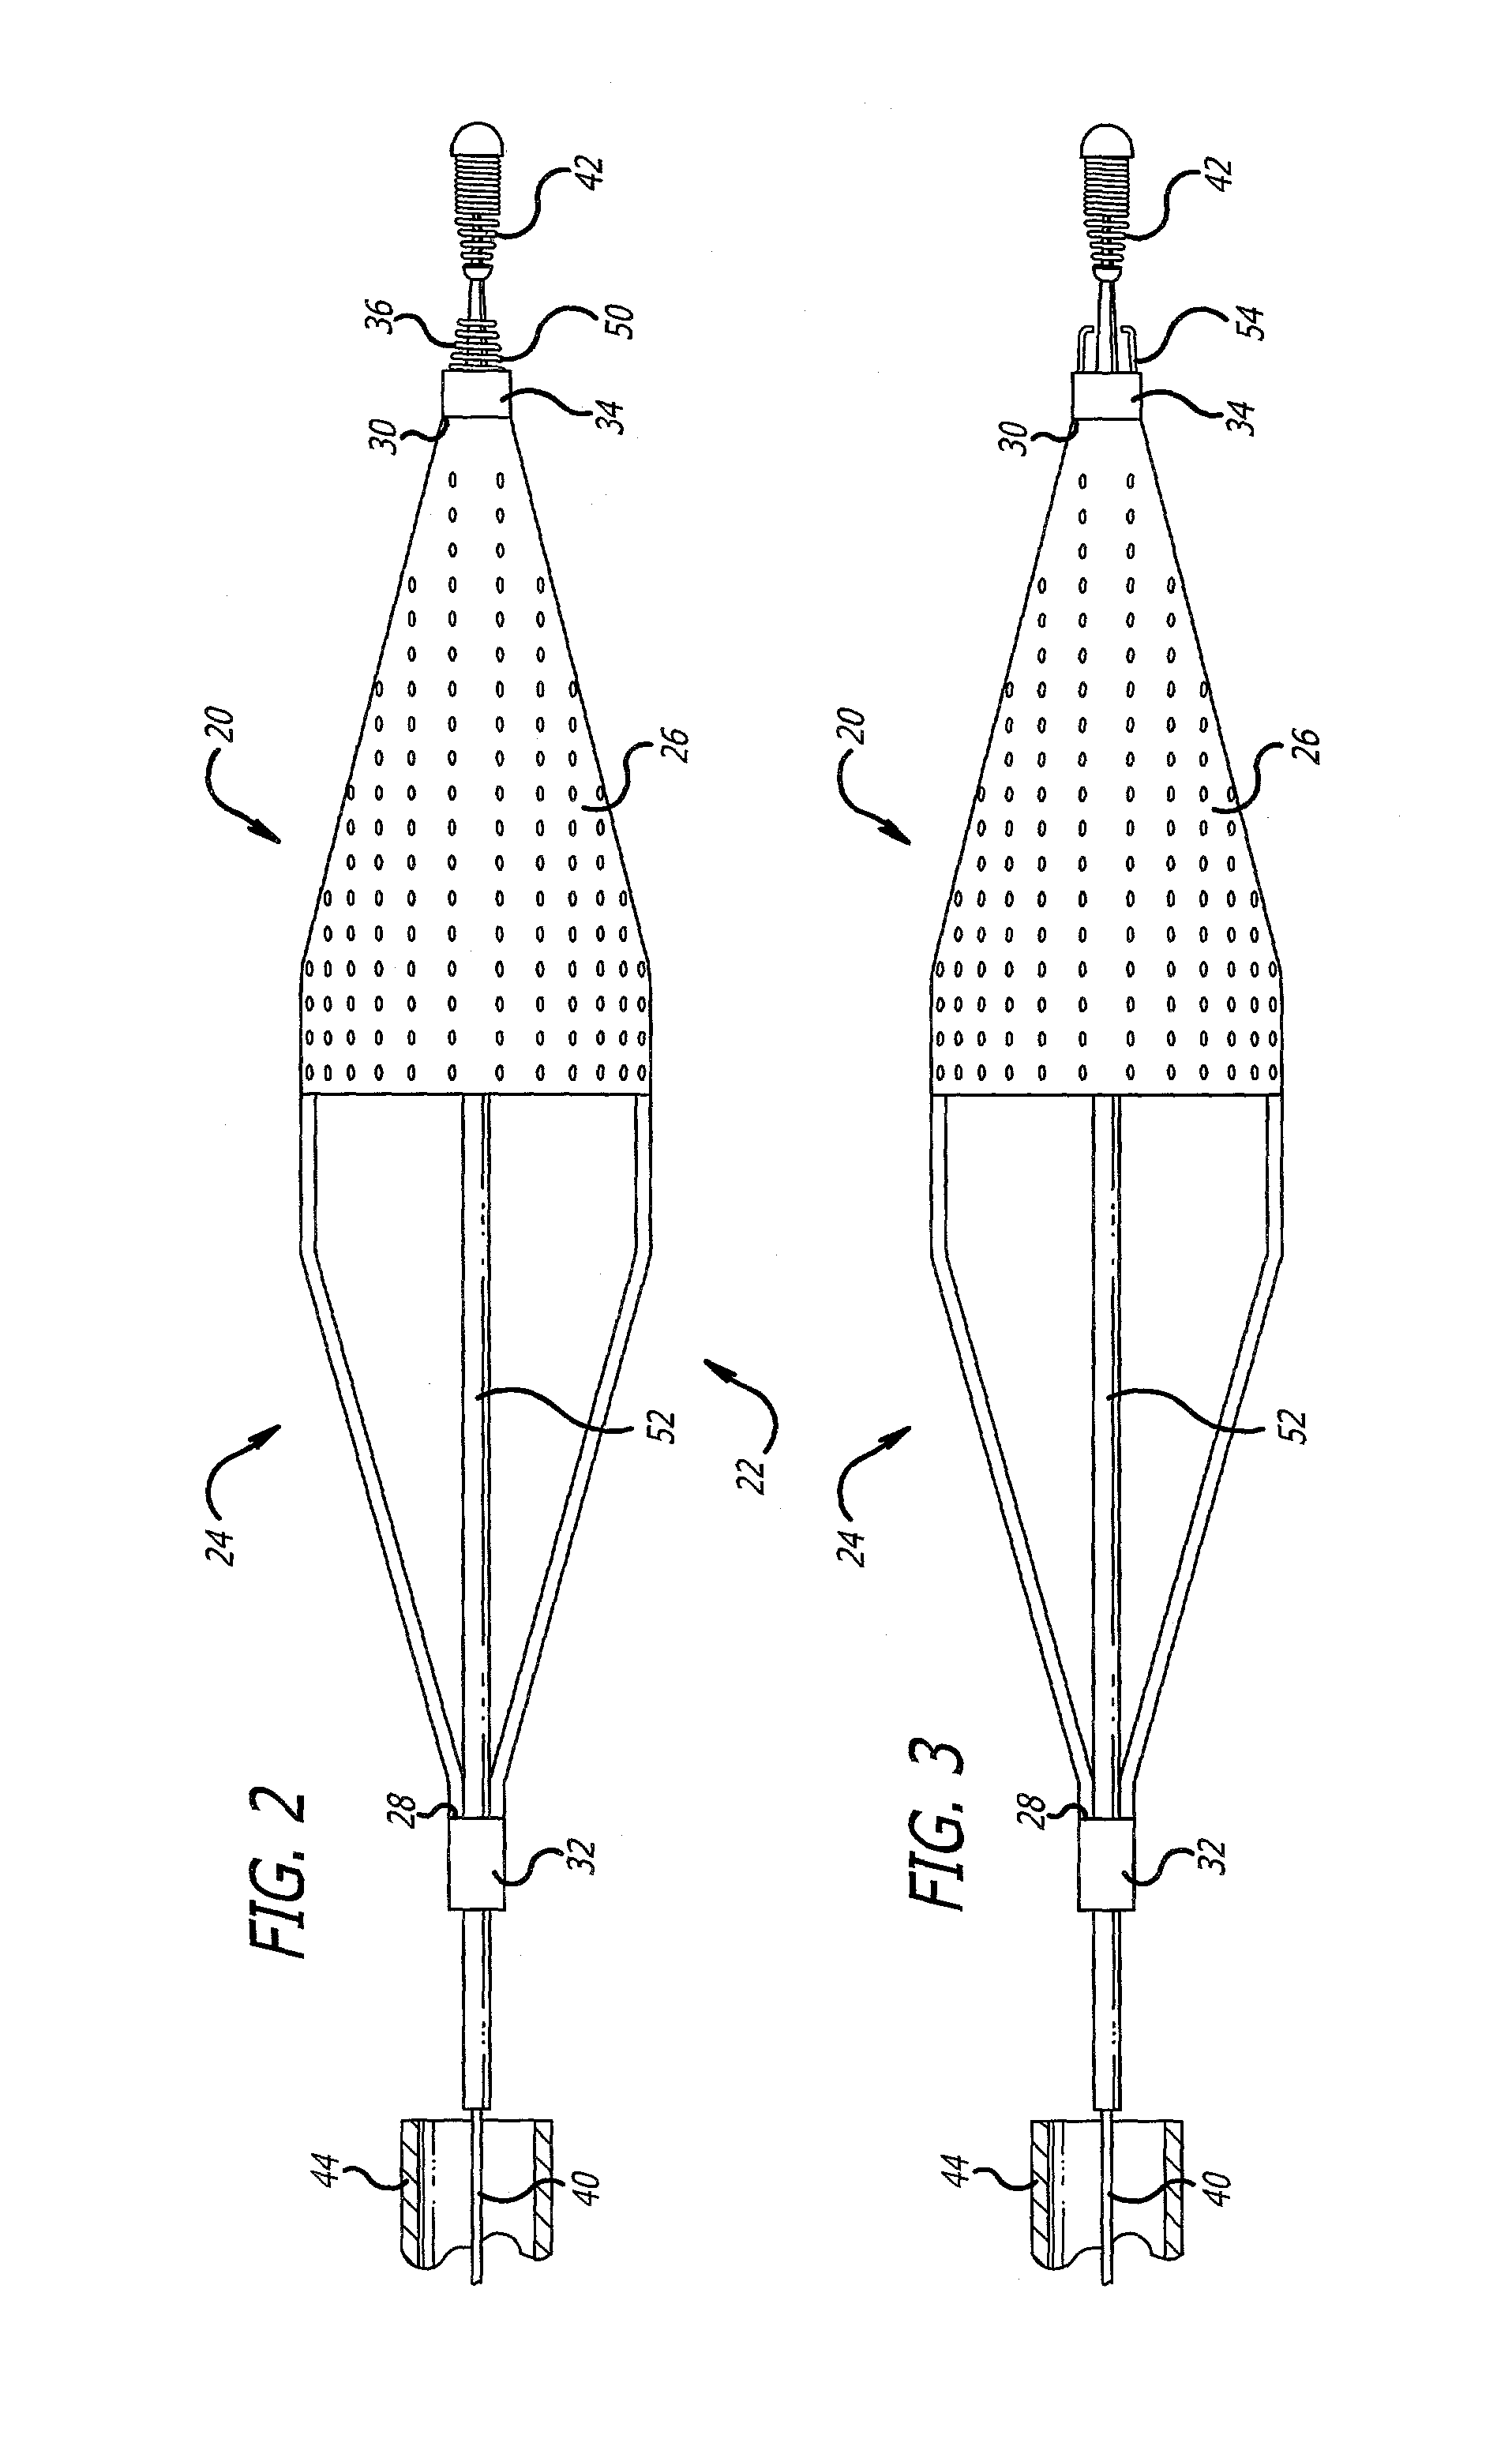 Guide wire with embolic filtering attachment